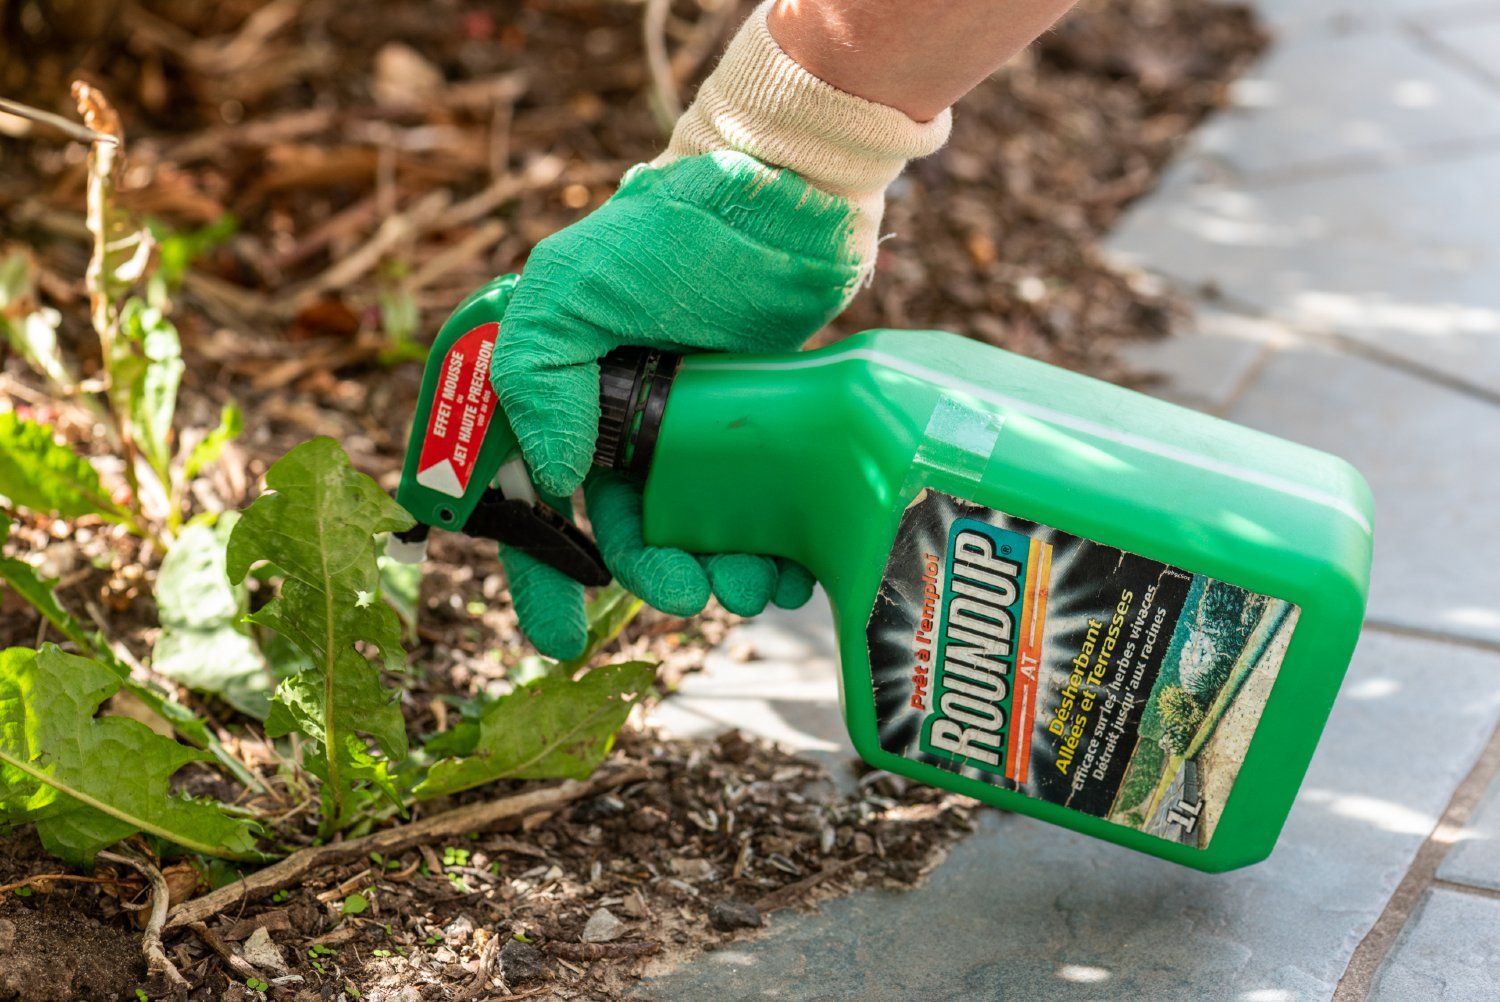 Person wearing gloves sprays weed with Roundup weed killer